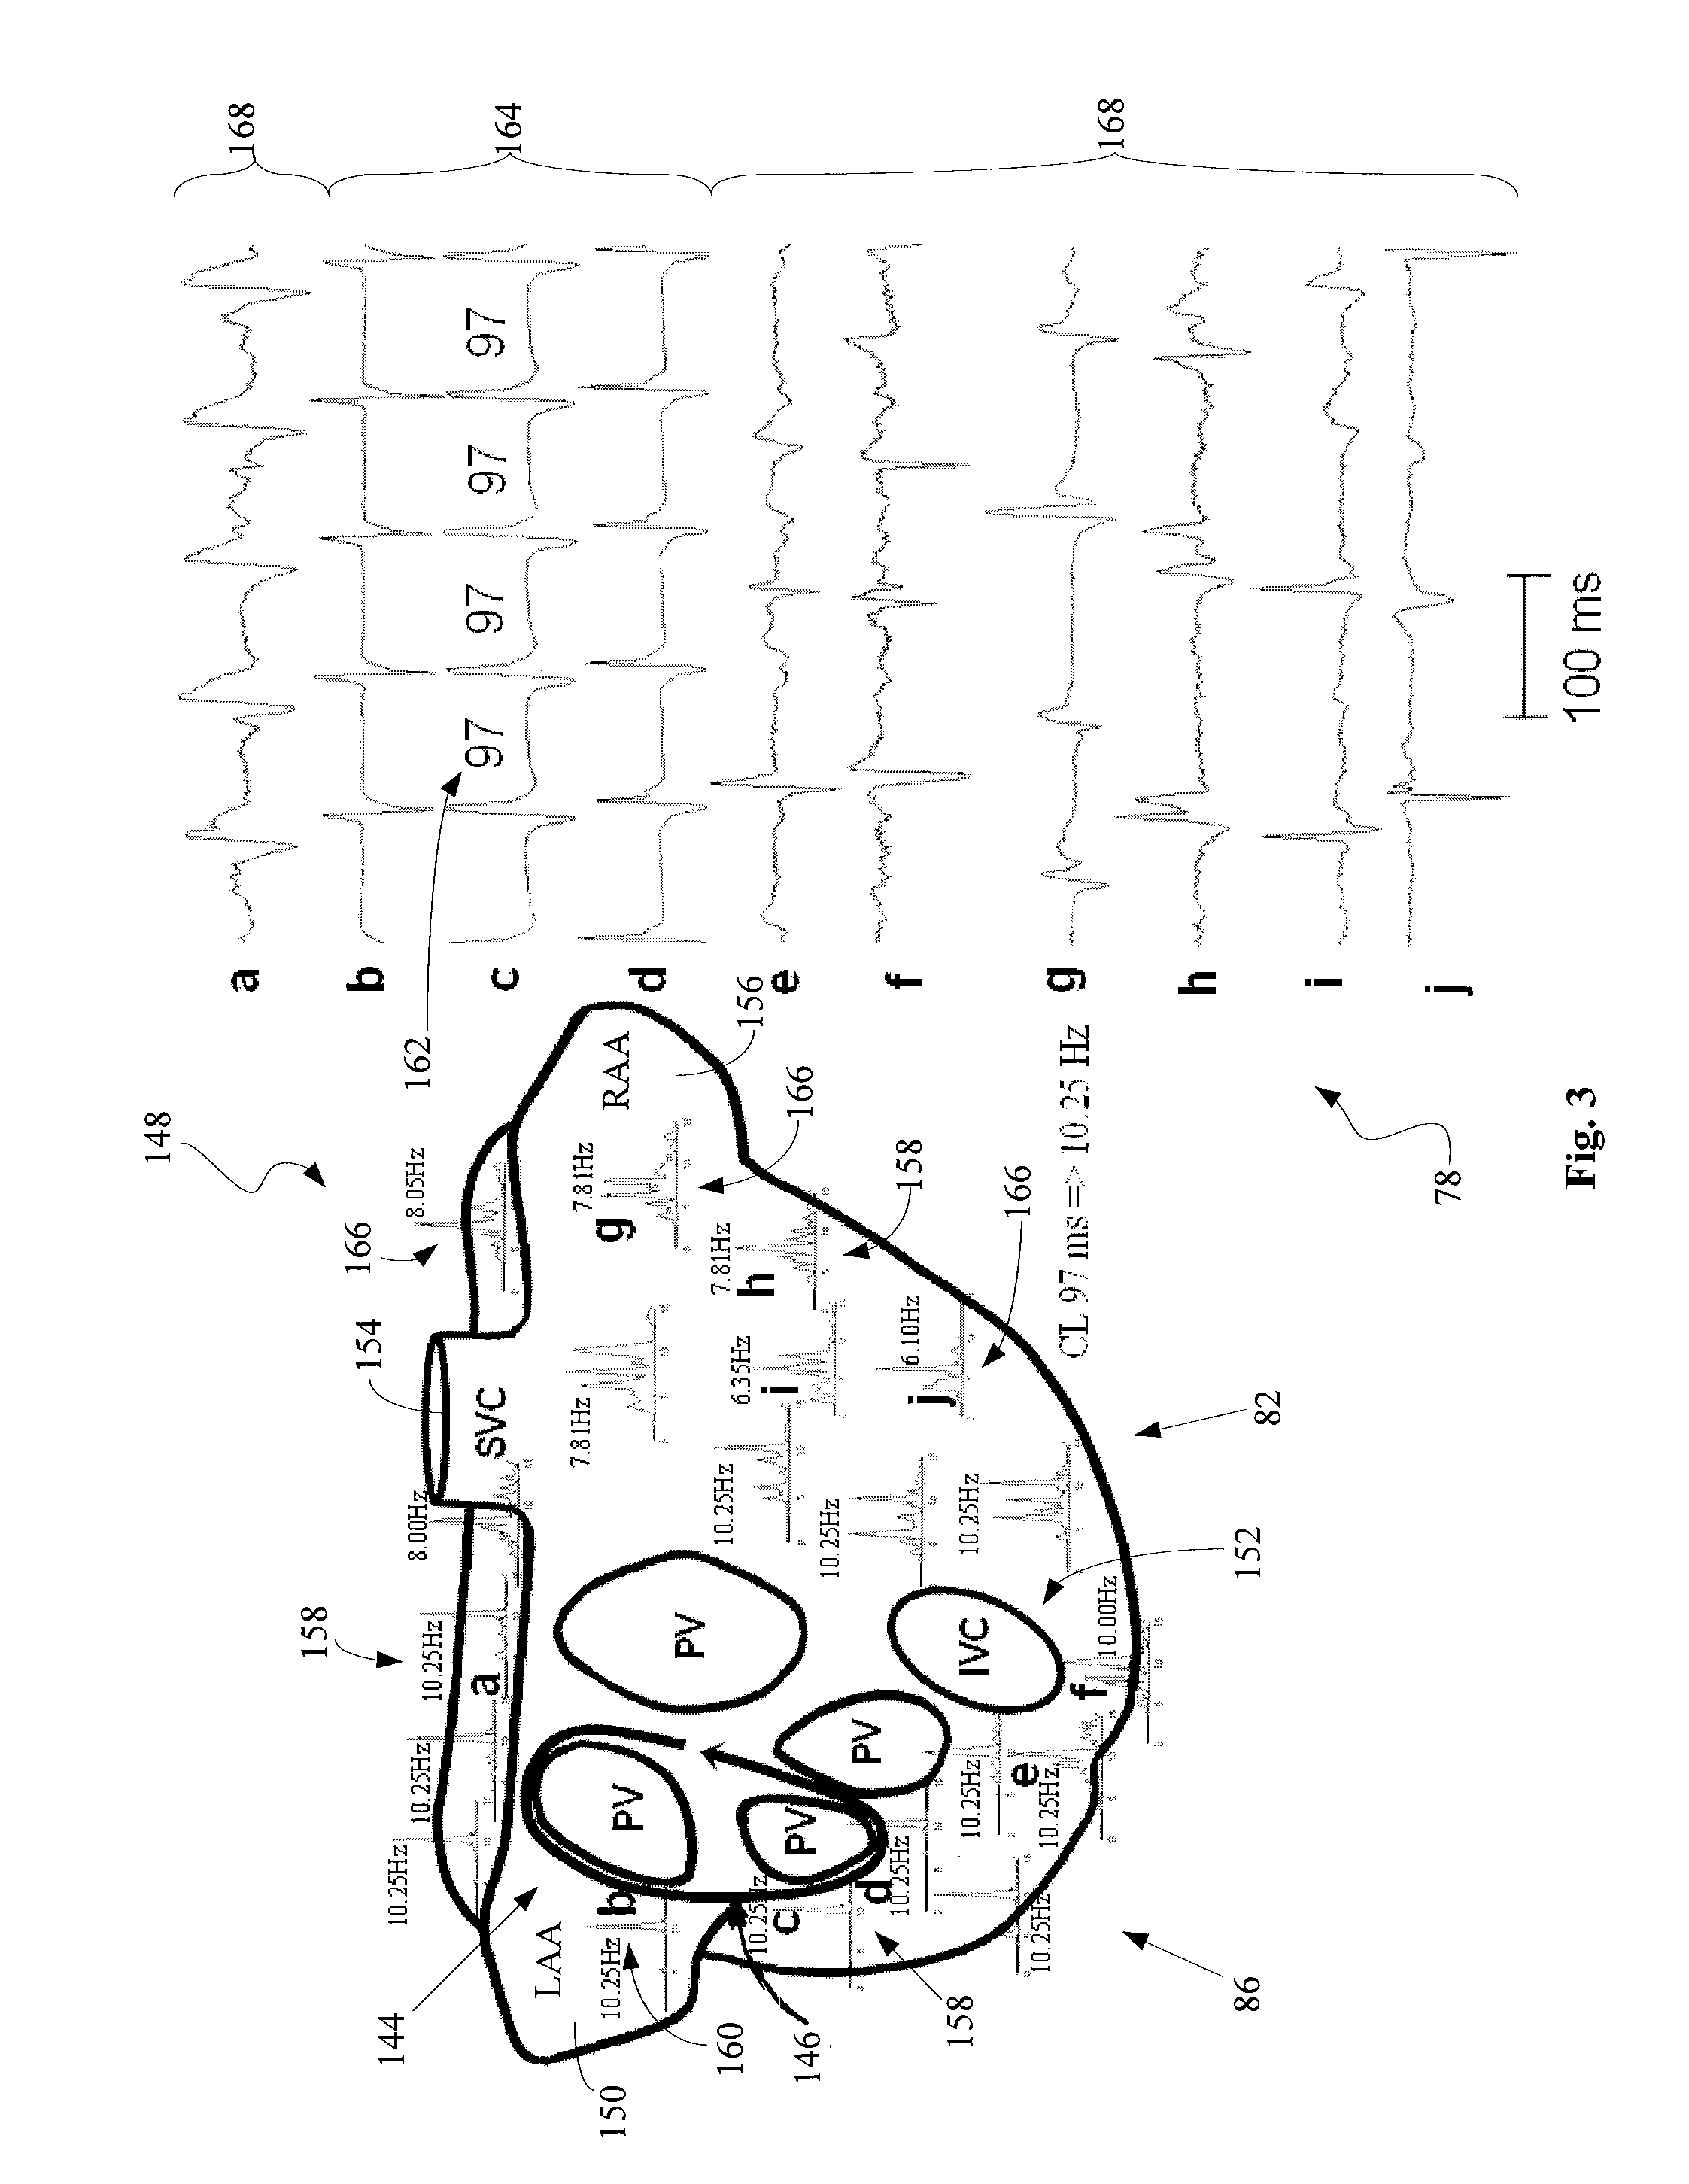 System and related methods for identifying a fibrillation driver